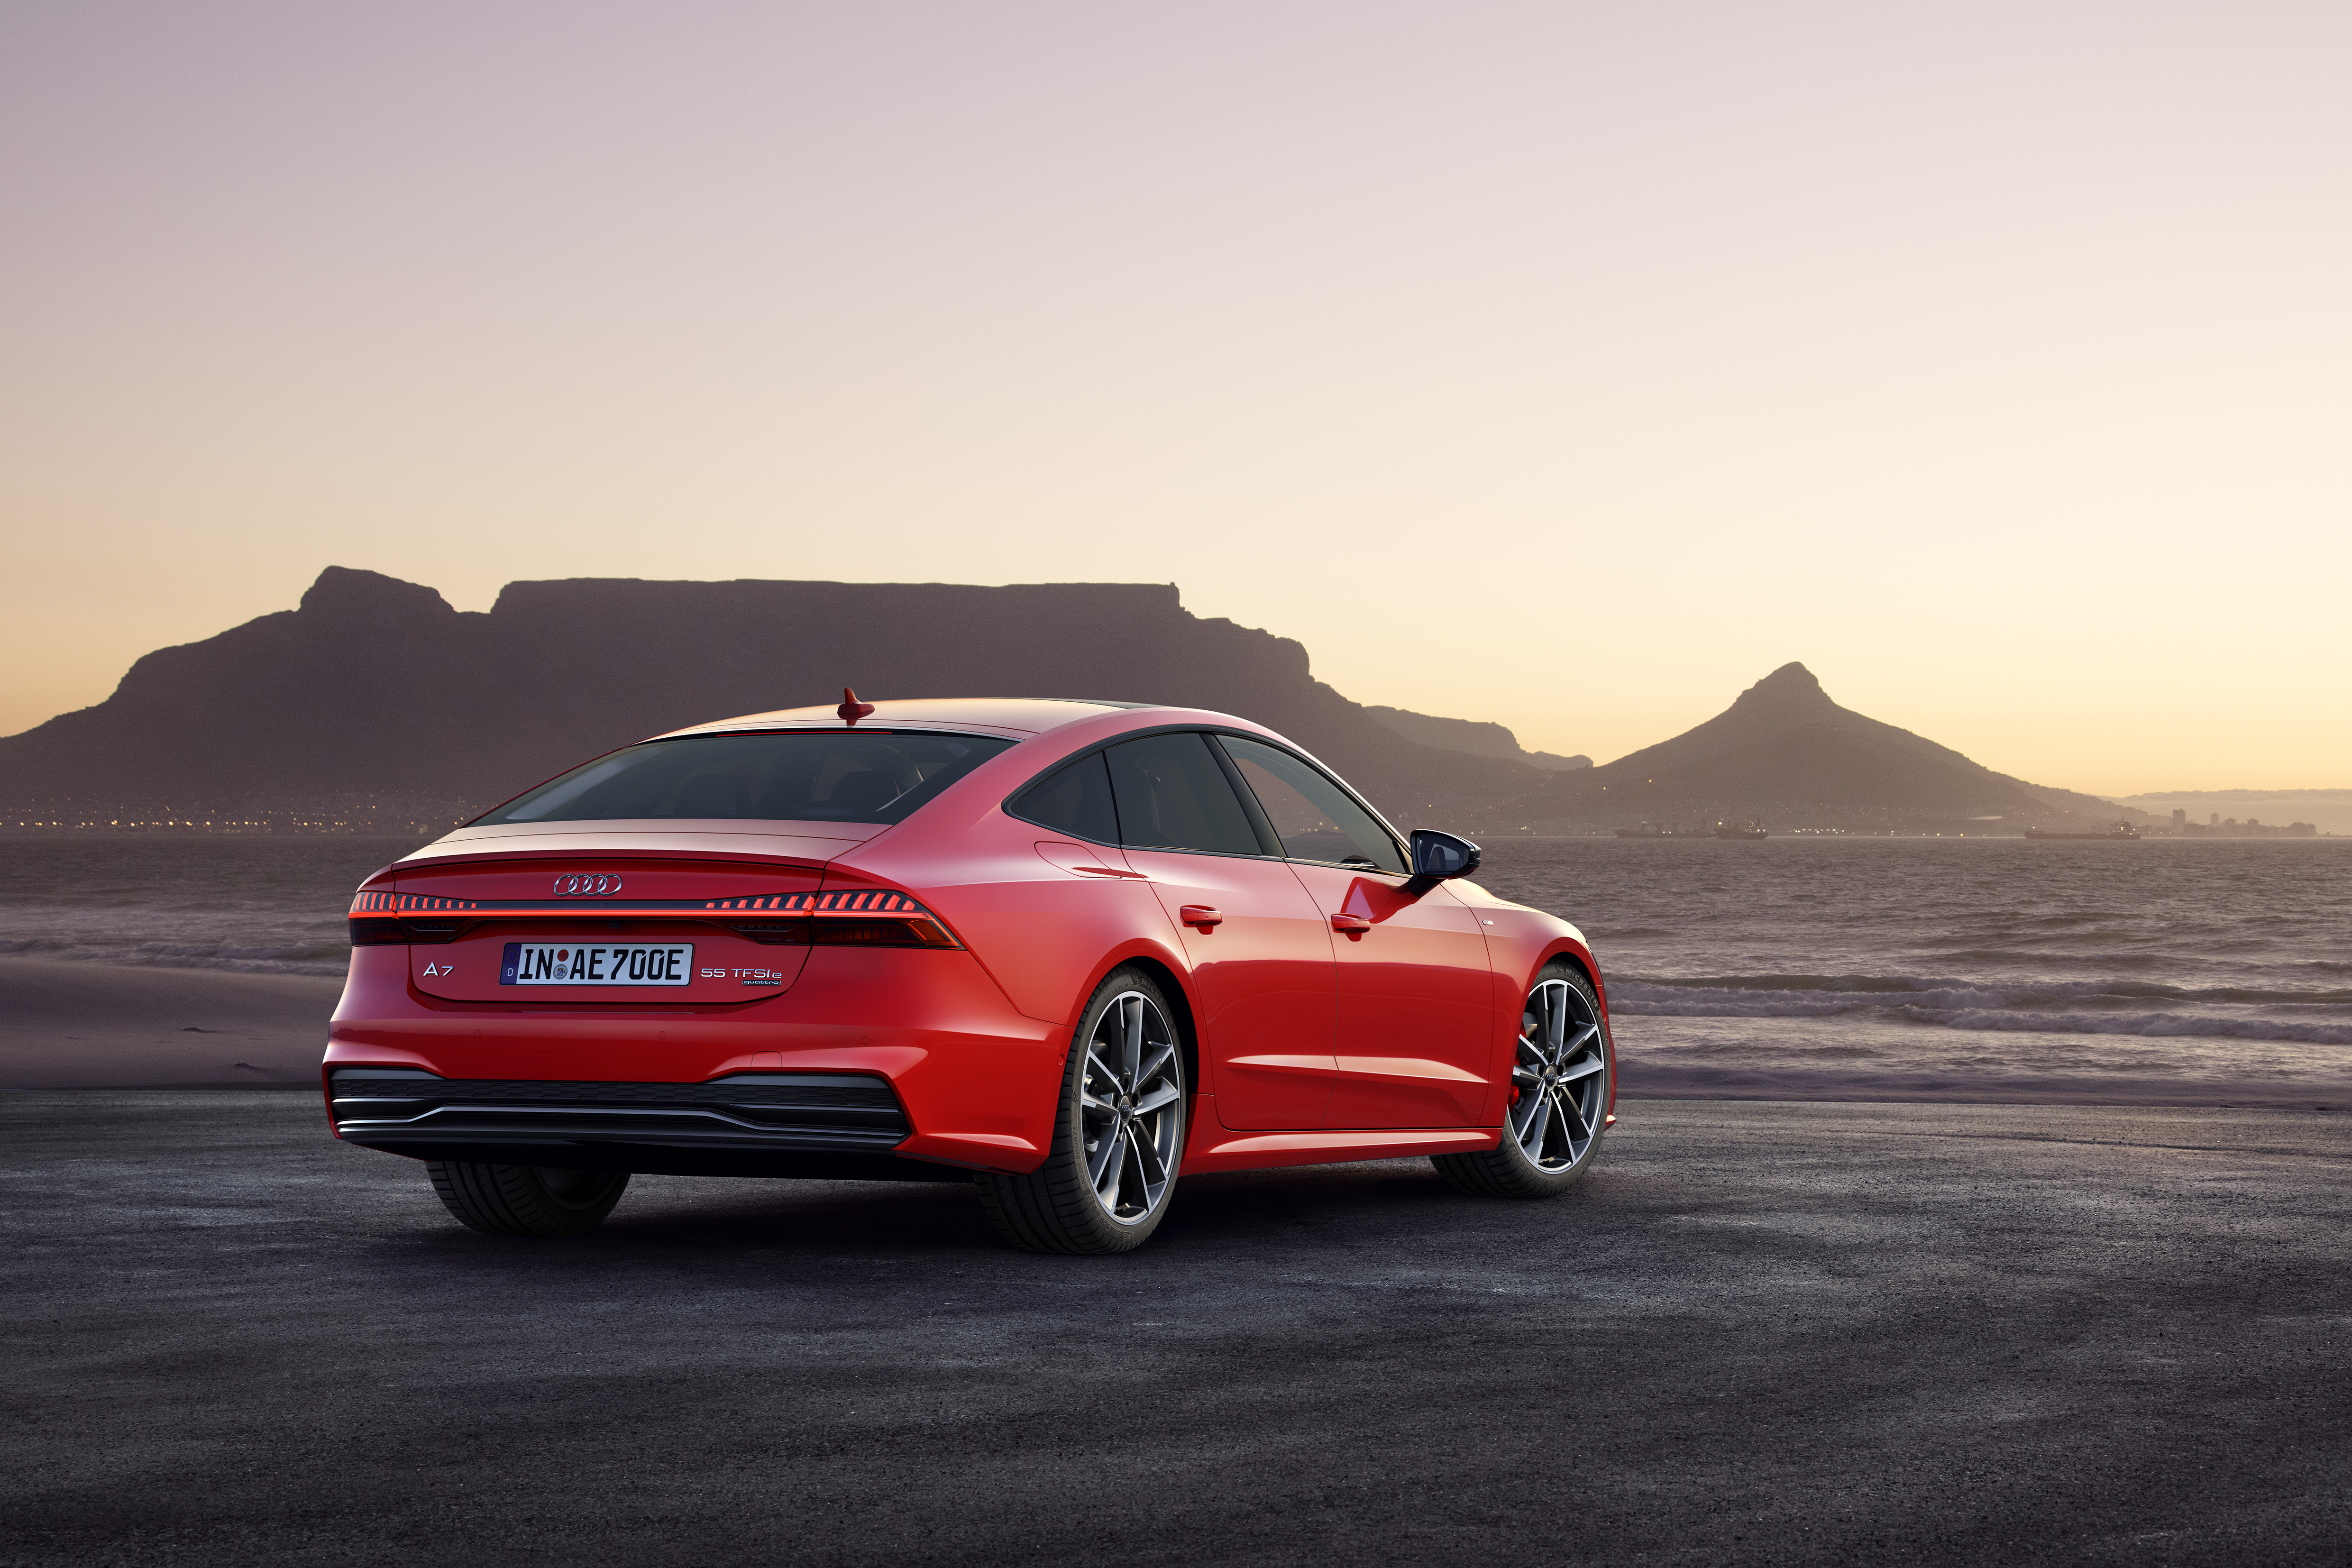 2019 Audi A7 Sportback, HD Cars, 4k Wallpapers, Images, Backgrounds, Photos and Pictures